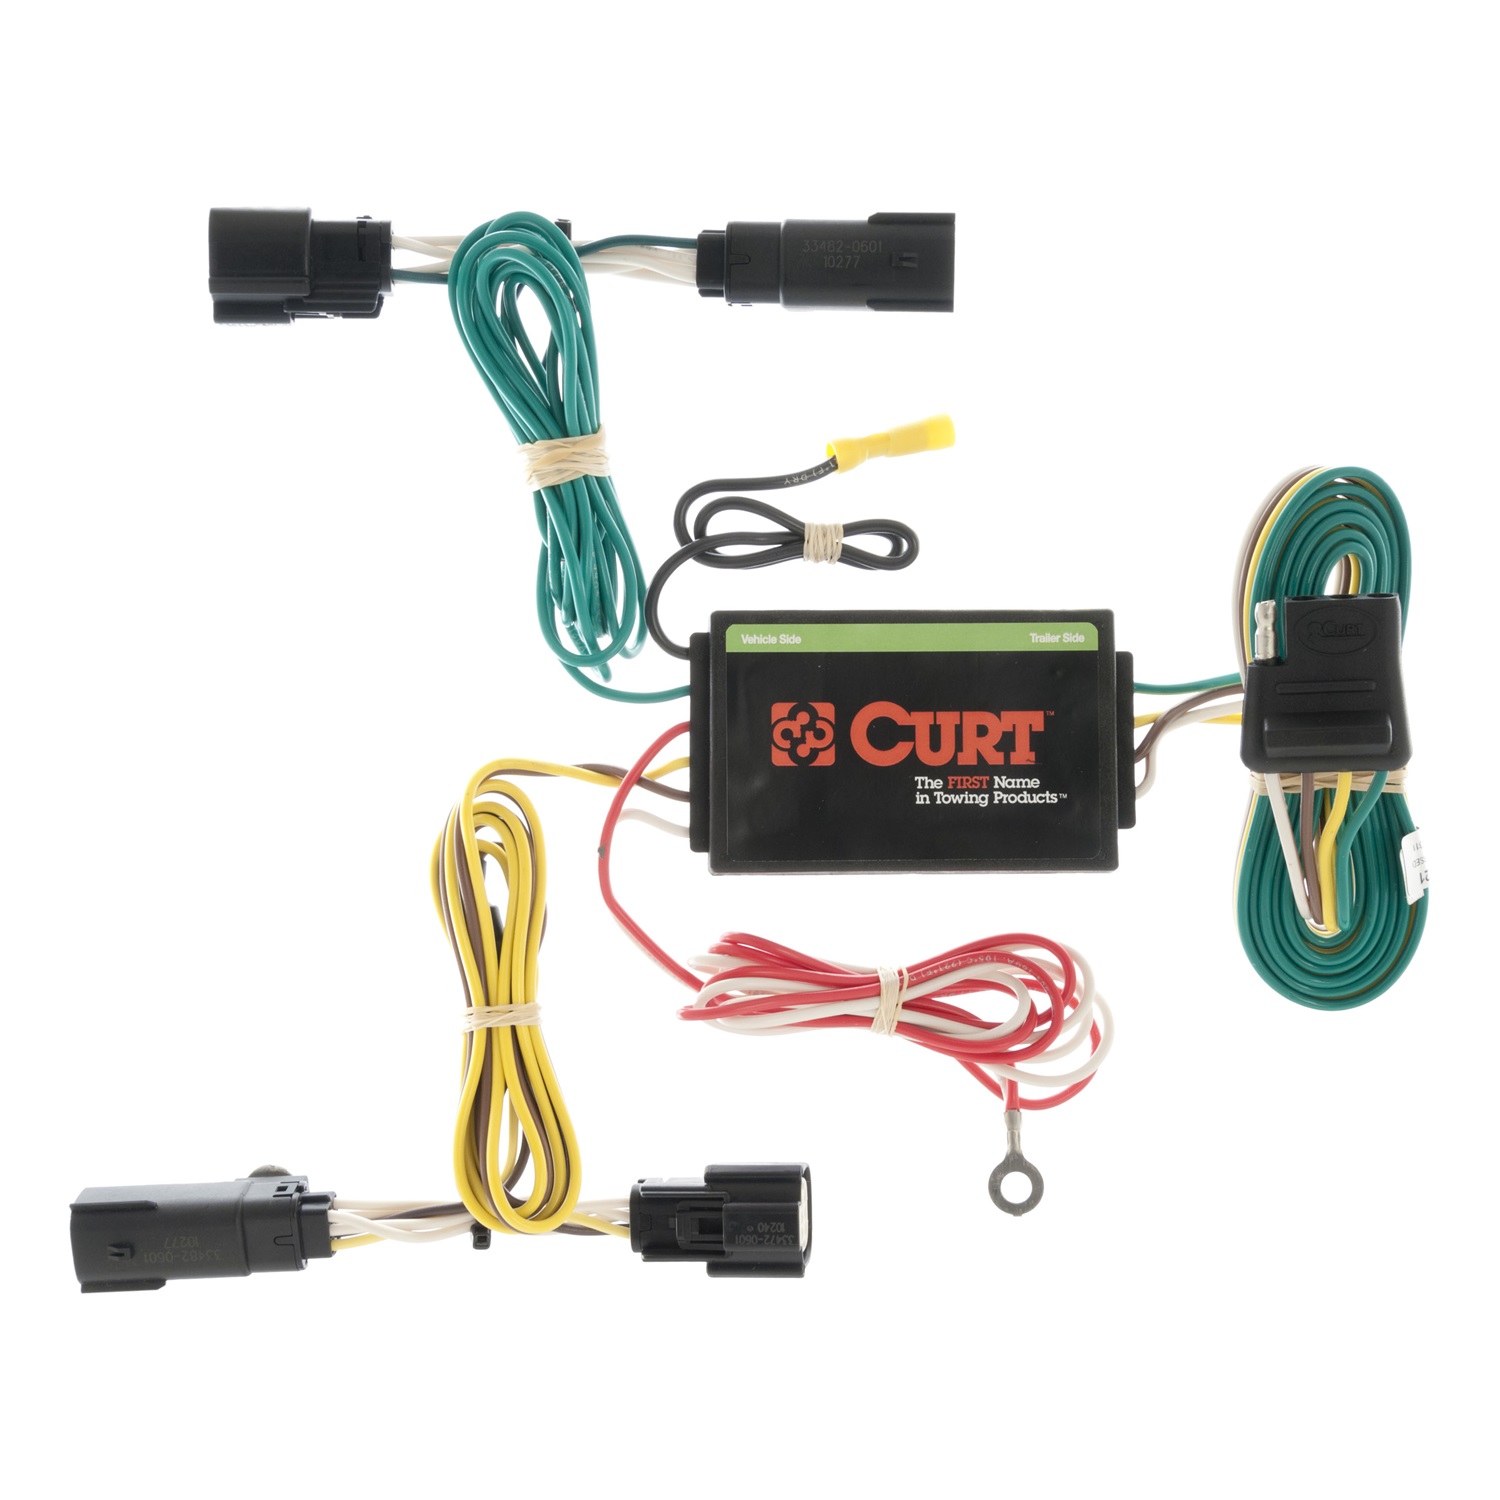 CURT Manufacturing CURT Manufacturing 56121 Wiring T-Connectors 11-13 Fits MKX